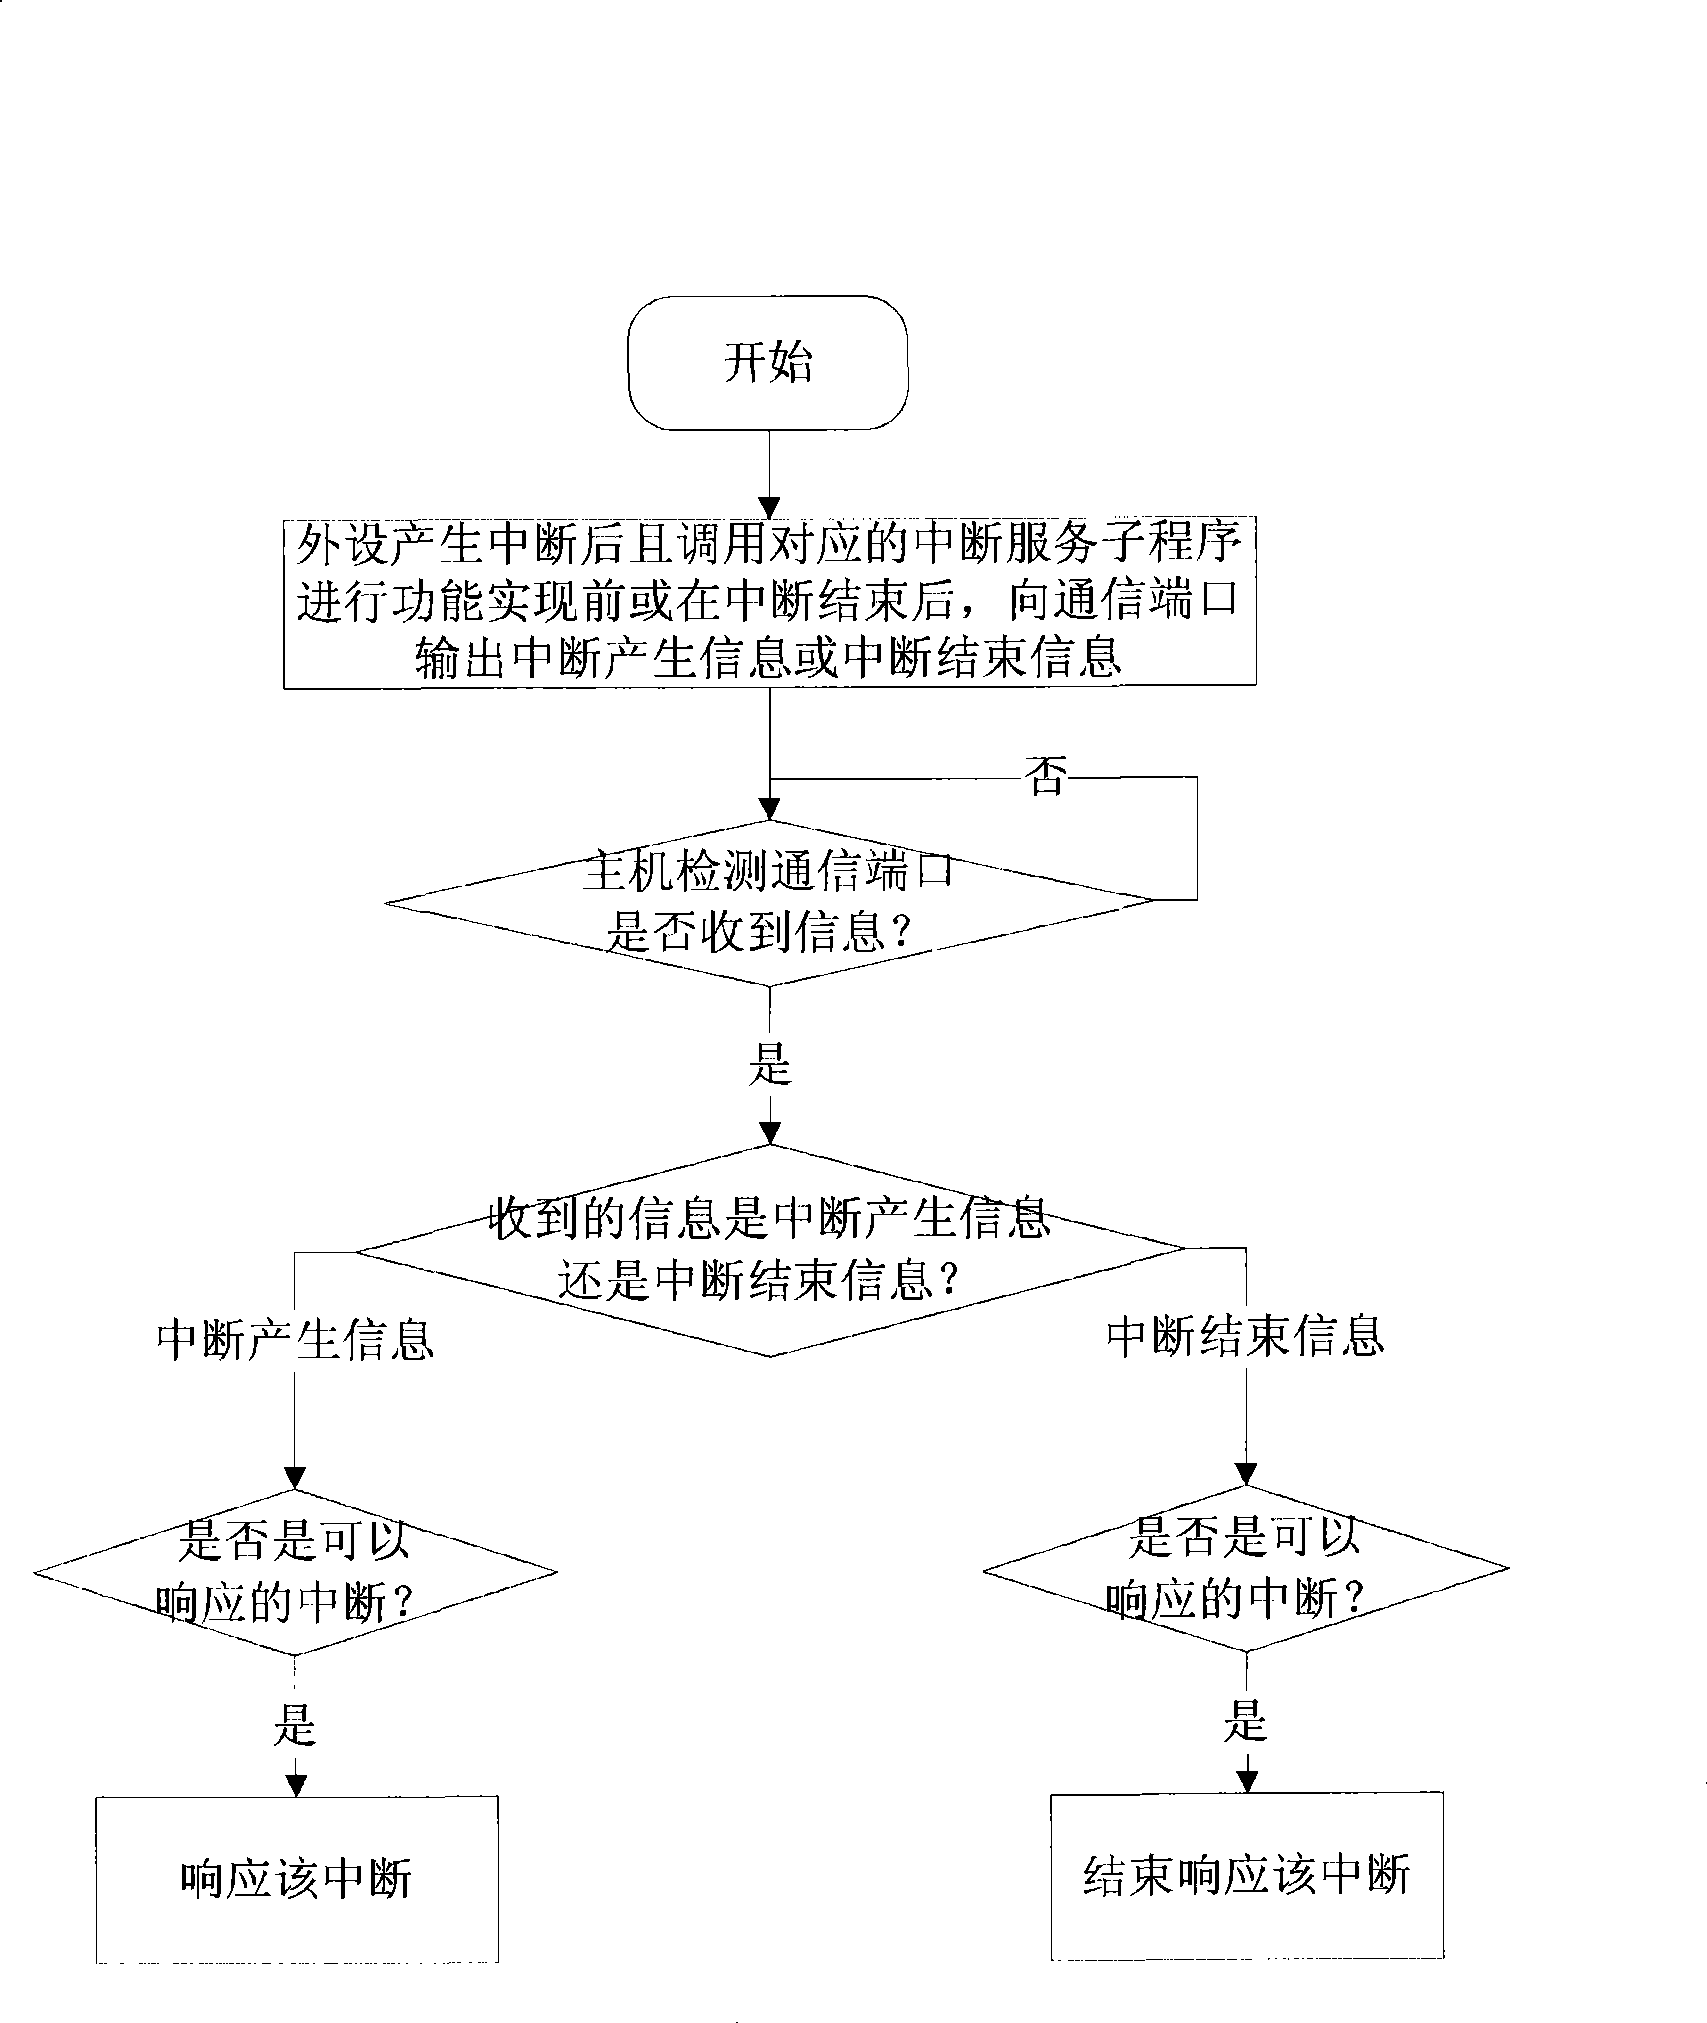 Method for responding and stopping response of host computer and processing peripheral interrupt